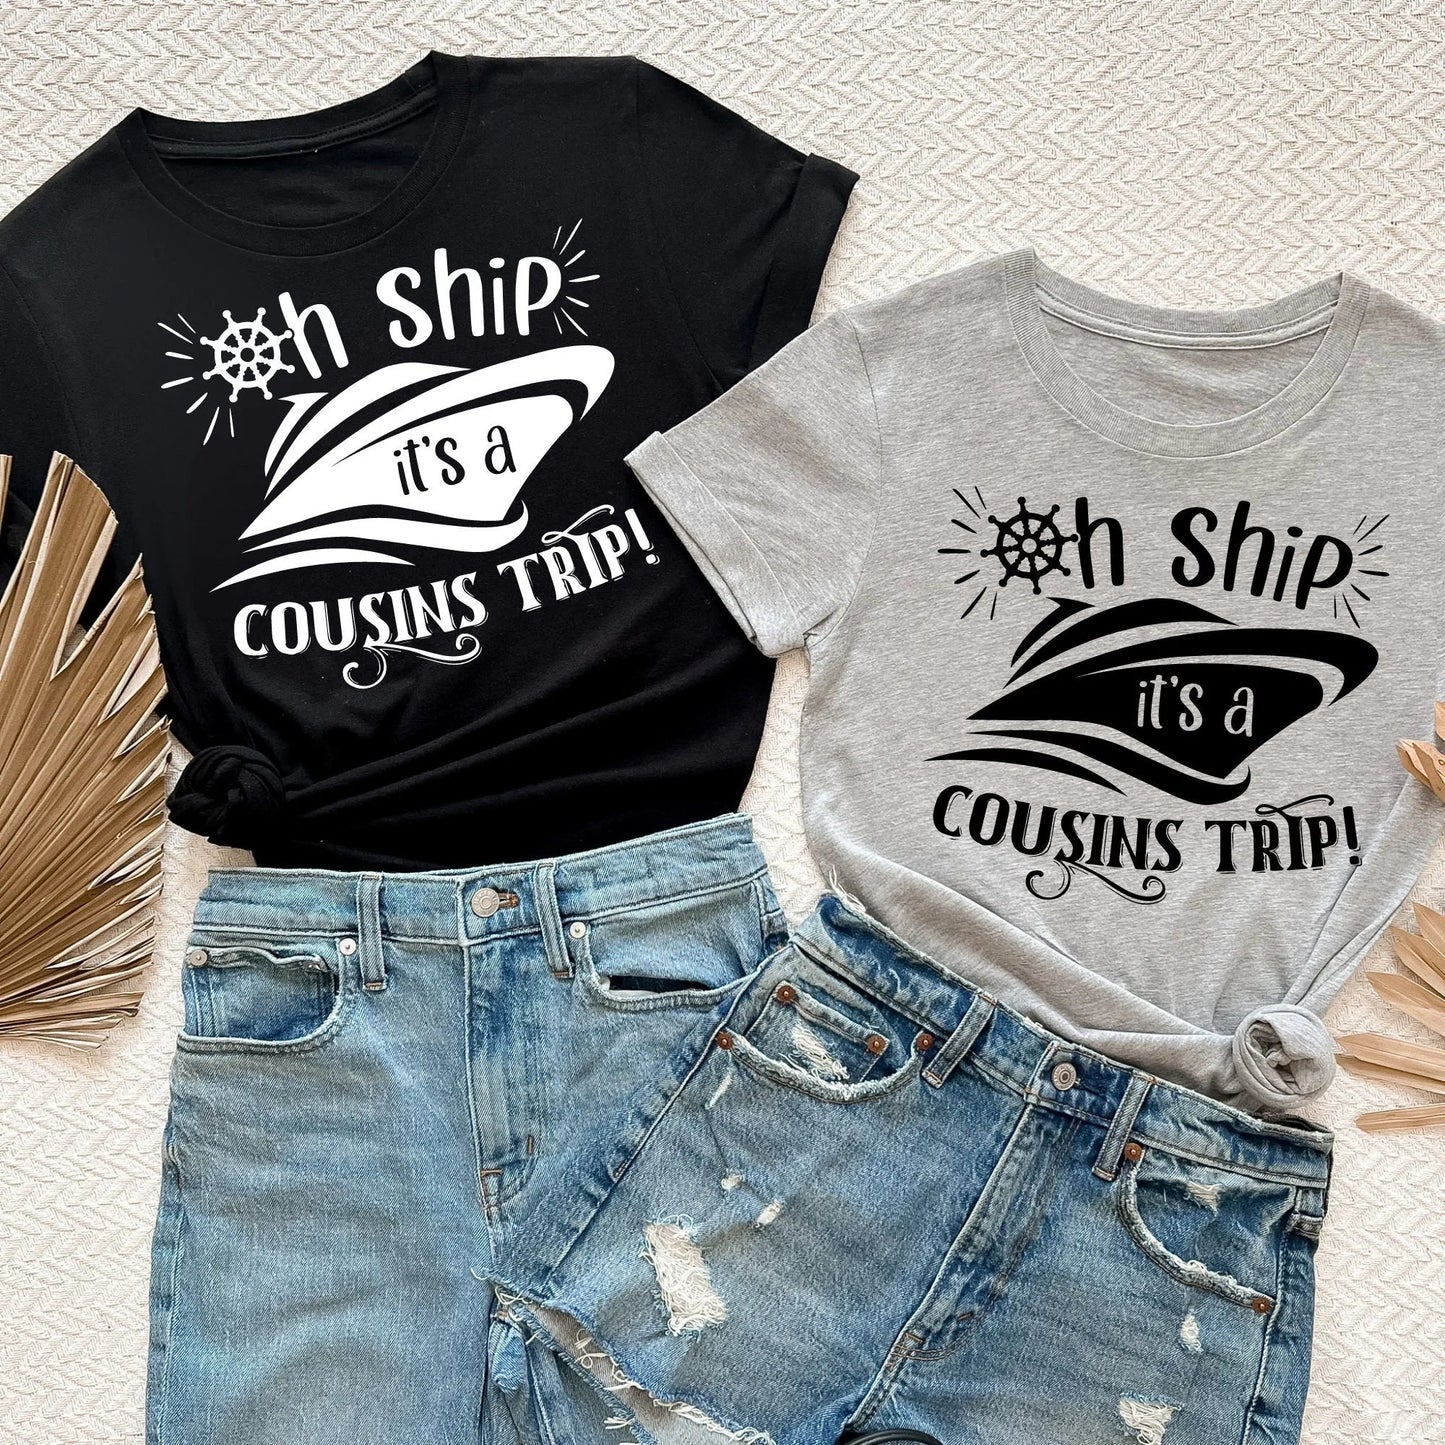 Cousin Crew Shirts, Cousins Cruise T-shirts, Matching Family Vacation Tees, Cousin gifts, Cousin shirts, Christmas Cousin Girls or Guys Trip HMDesignStudioUS